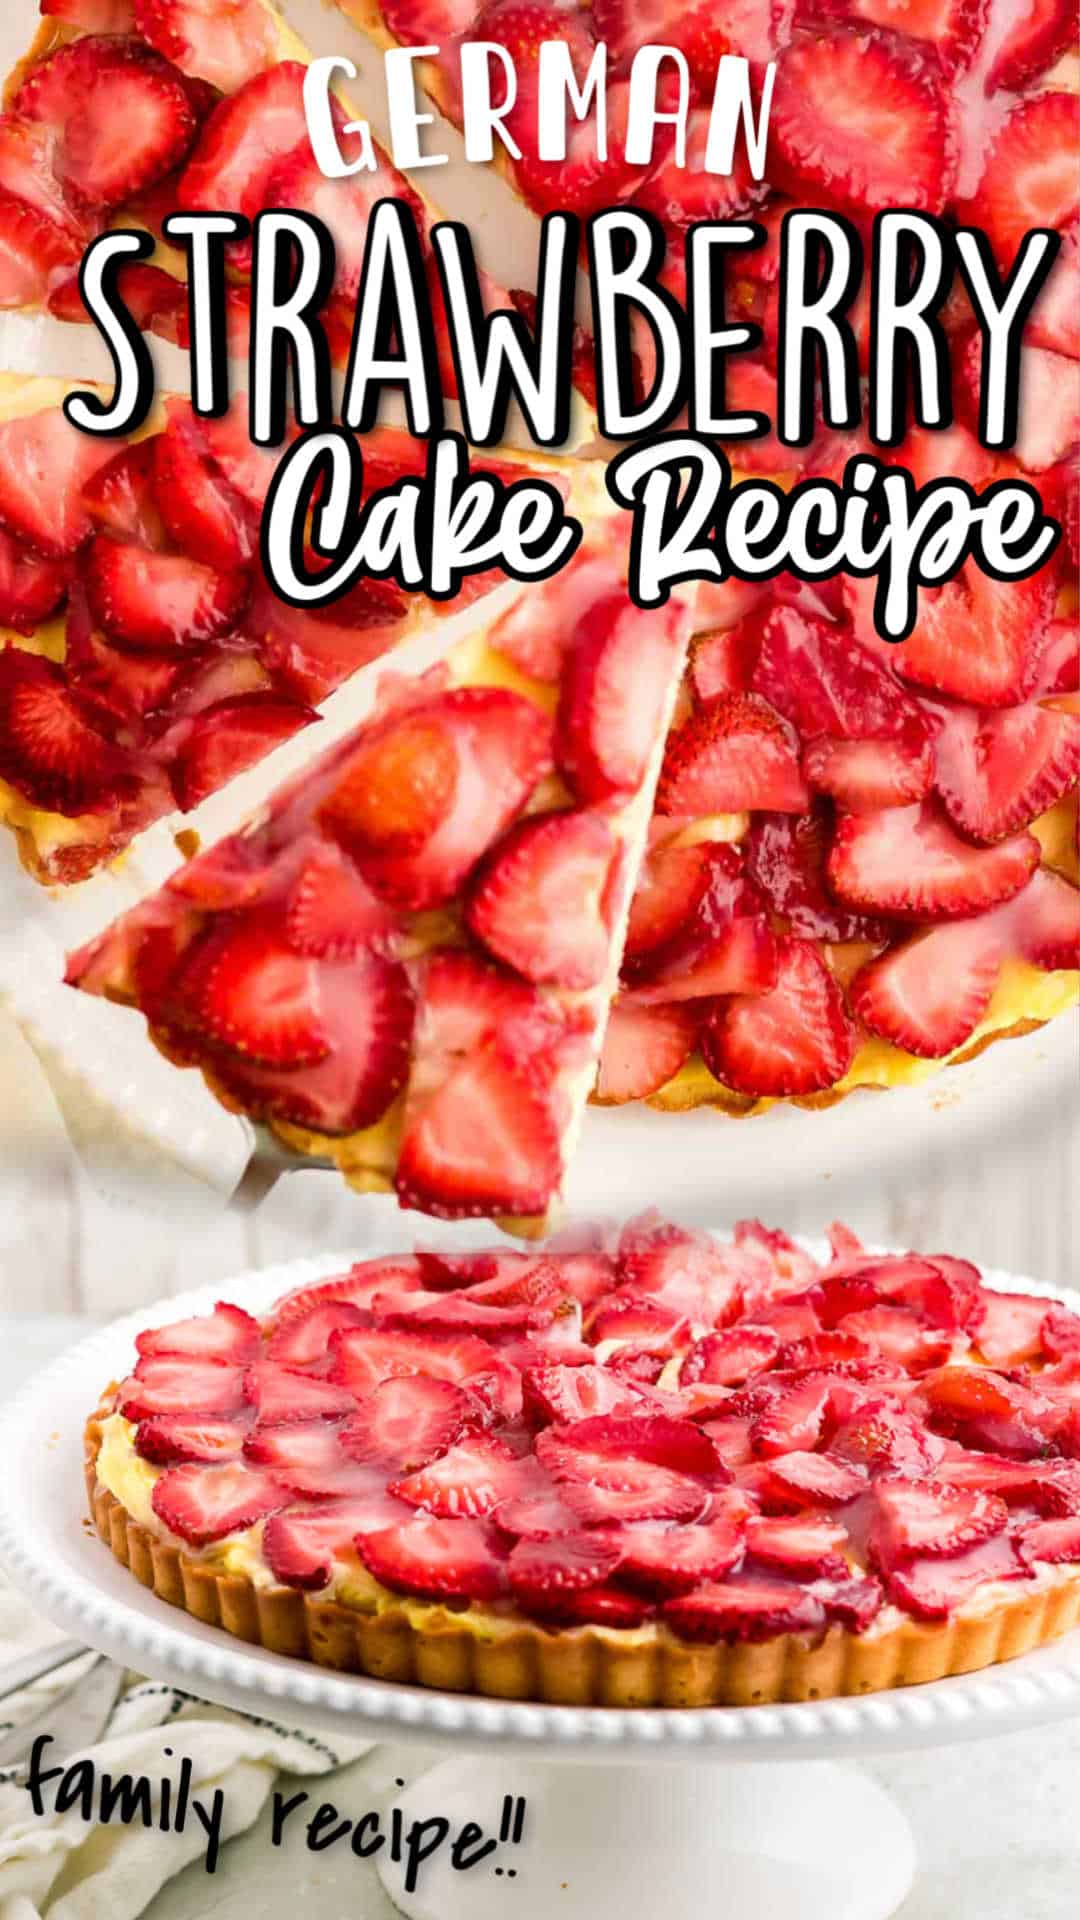 Strawberry Torte is a classic German summer dessert. A light, airy, moist sponge cake with a vanilla pudding cream filling and topped with fresh, juicy glazed strawberries. #cheerfulcook #strawberry #torte #erdbeerkuchen #Germanfood ♡ cheerfulcook.com via @cheerfulcook